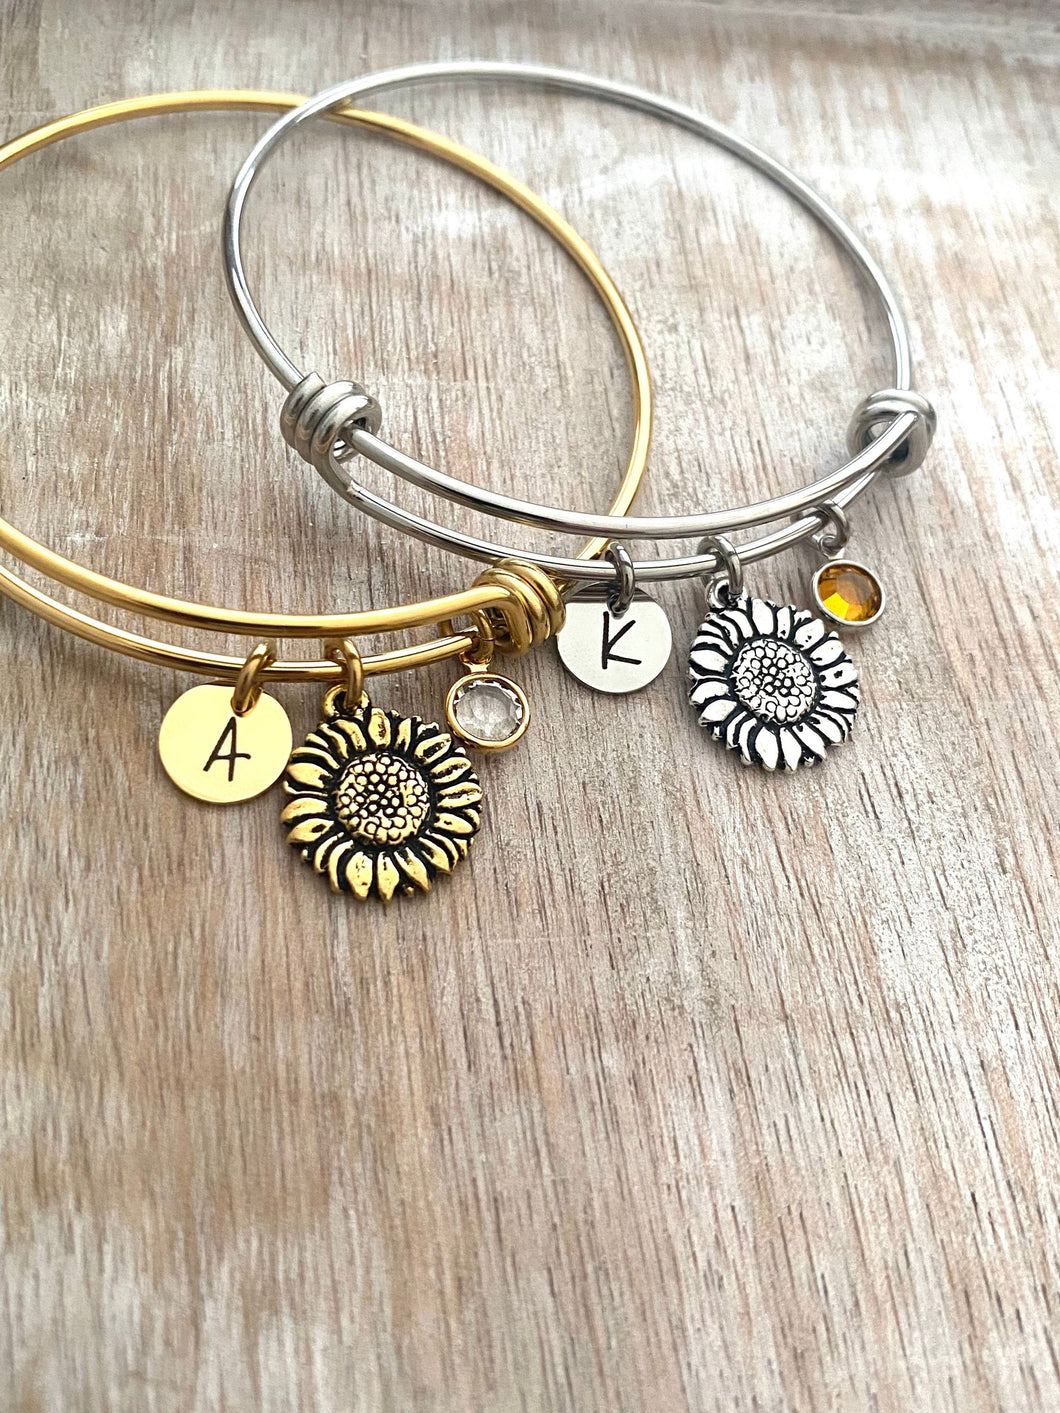 Sunflower charm bracelet - silver or gold stainless steel adjustable wire bangle - Swarovski crystal birthstone personalized initial disc